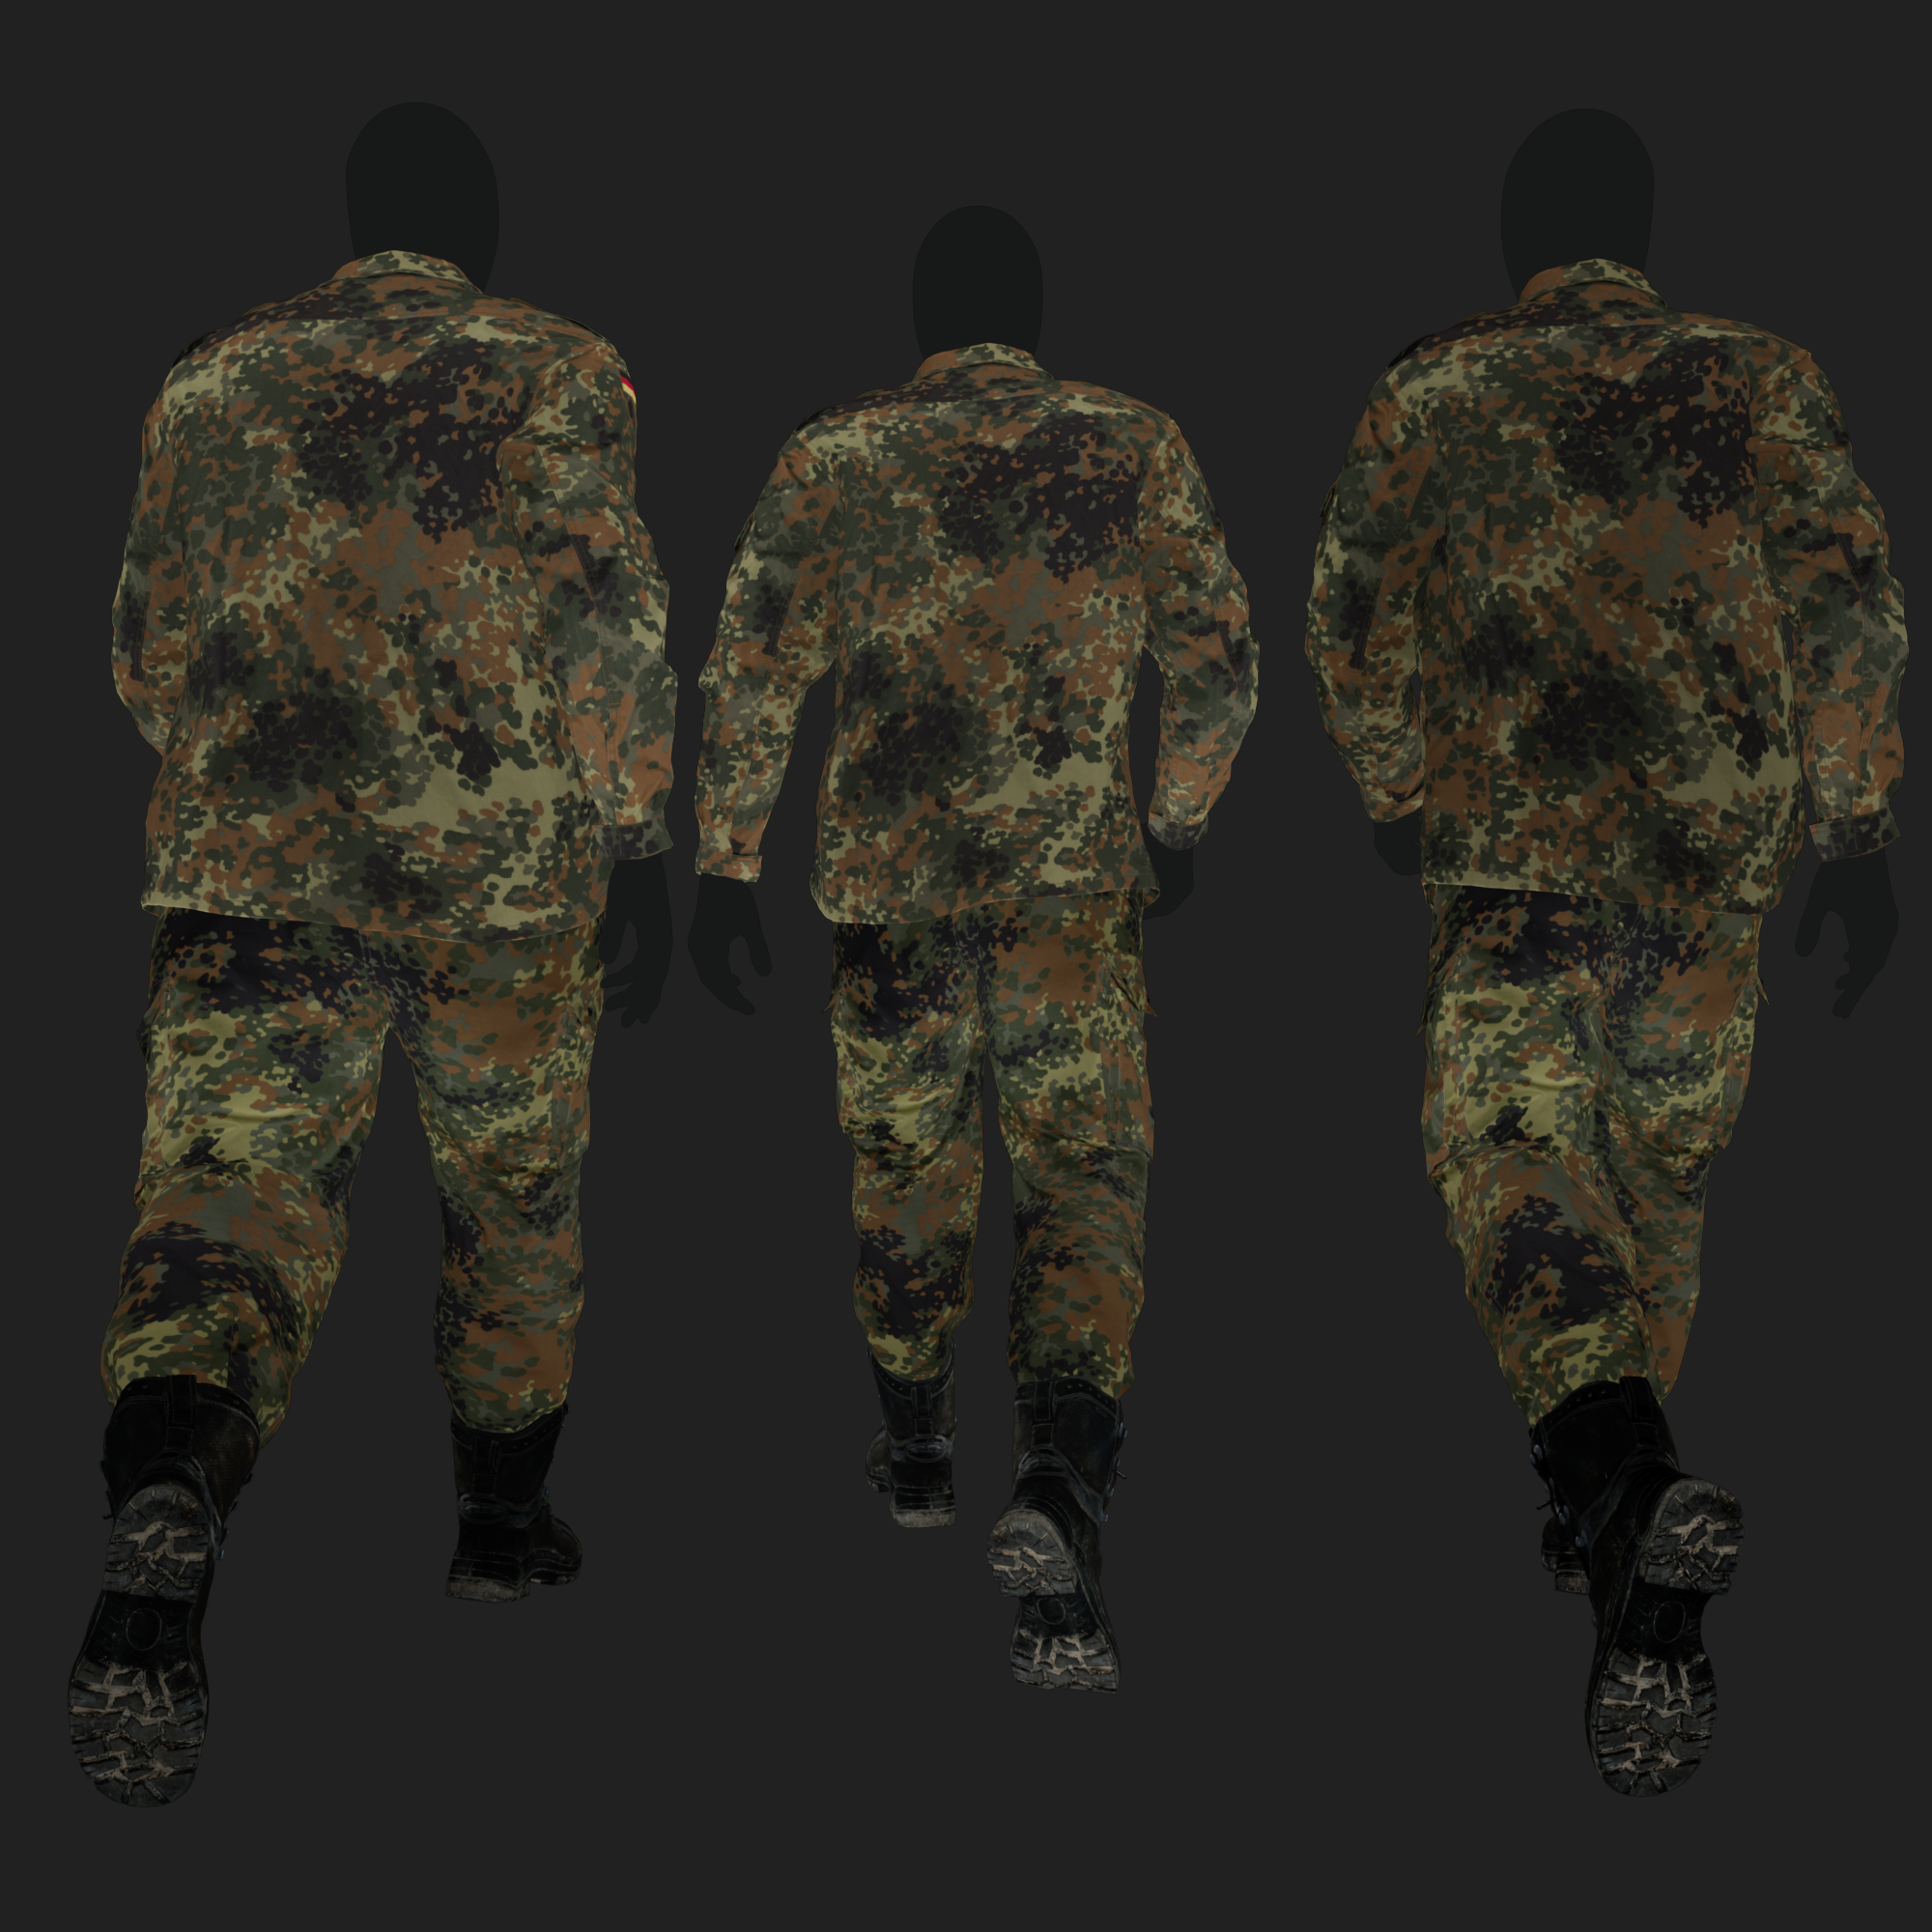 Albedo (Diffuse) map rendering of a 3D model of an animated walking male character dressed in: Germany Bundeswehr Uniform - back view